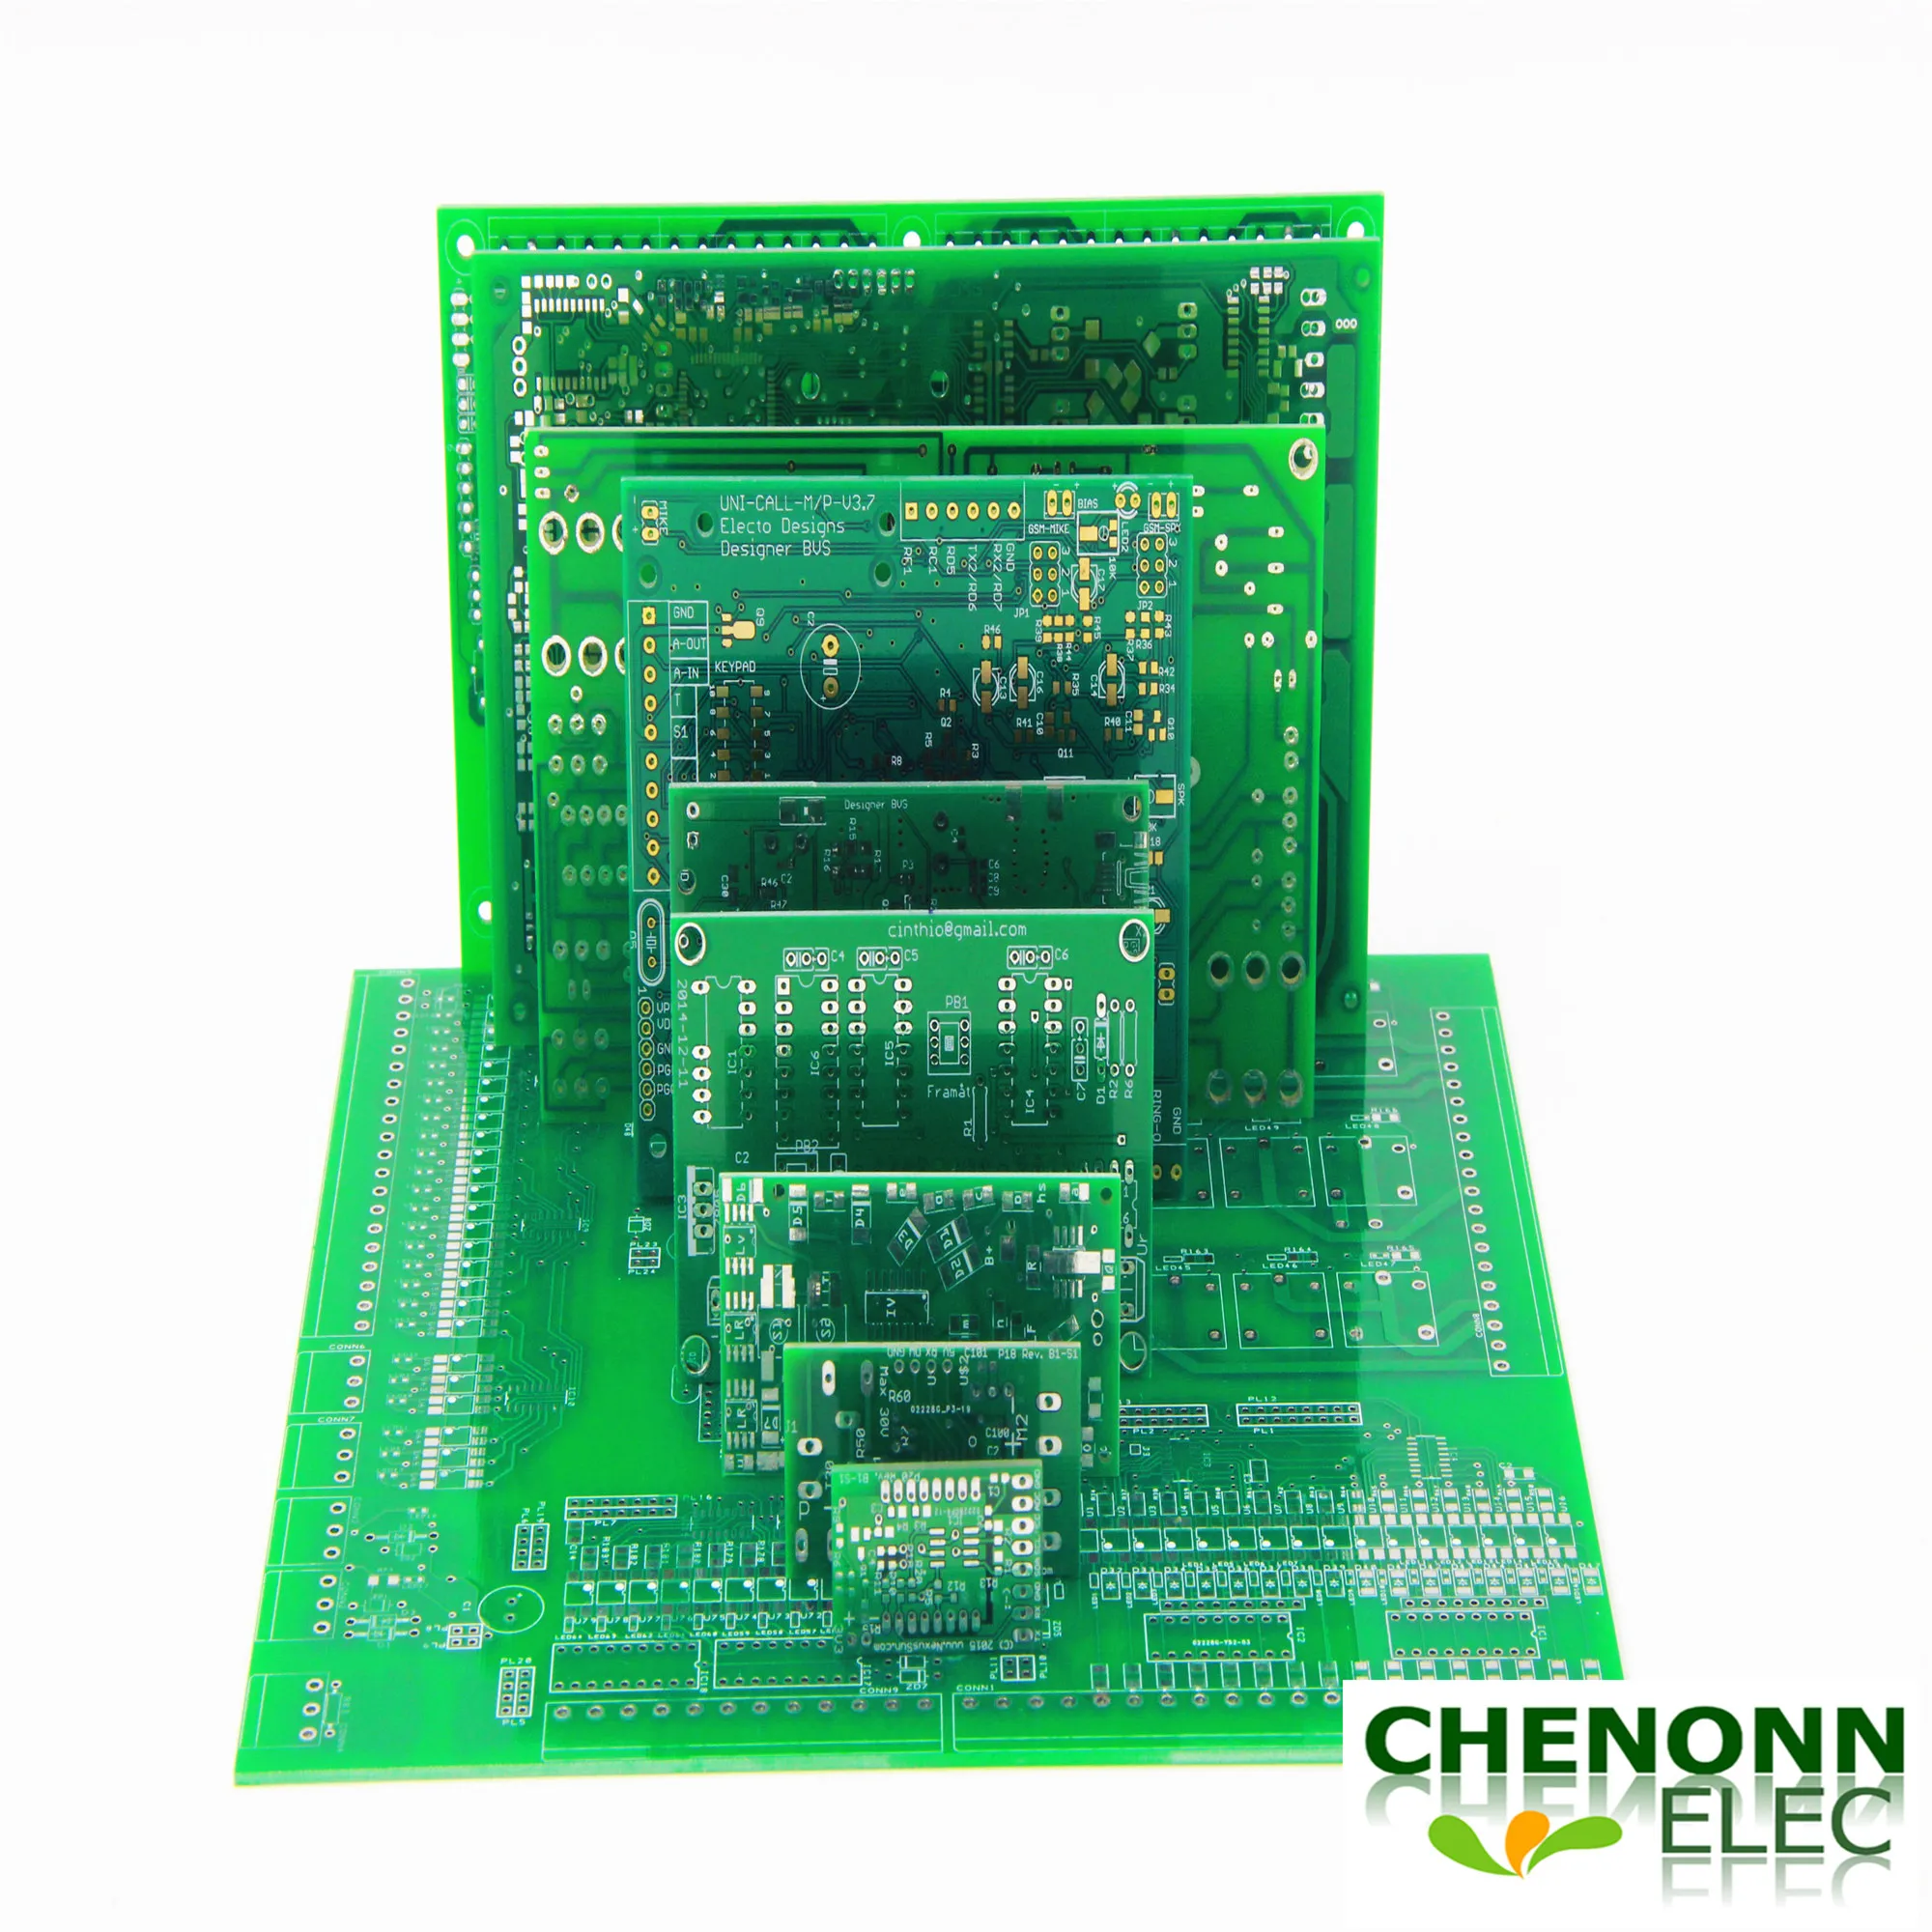 
CHENONN PCB prototyping/PCB Samples Manufacturing services 